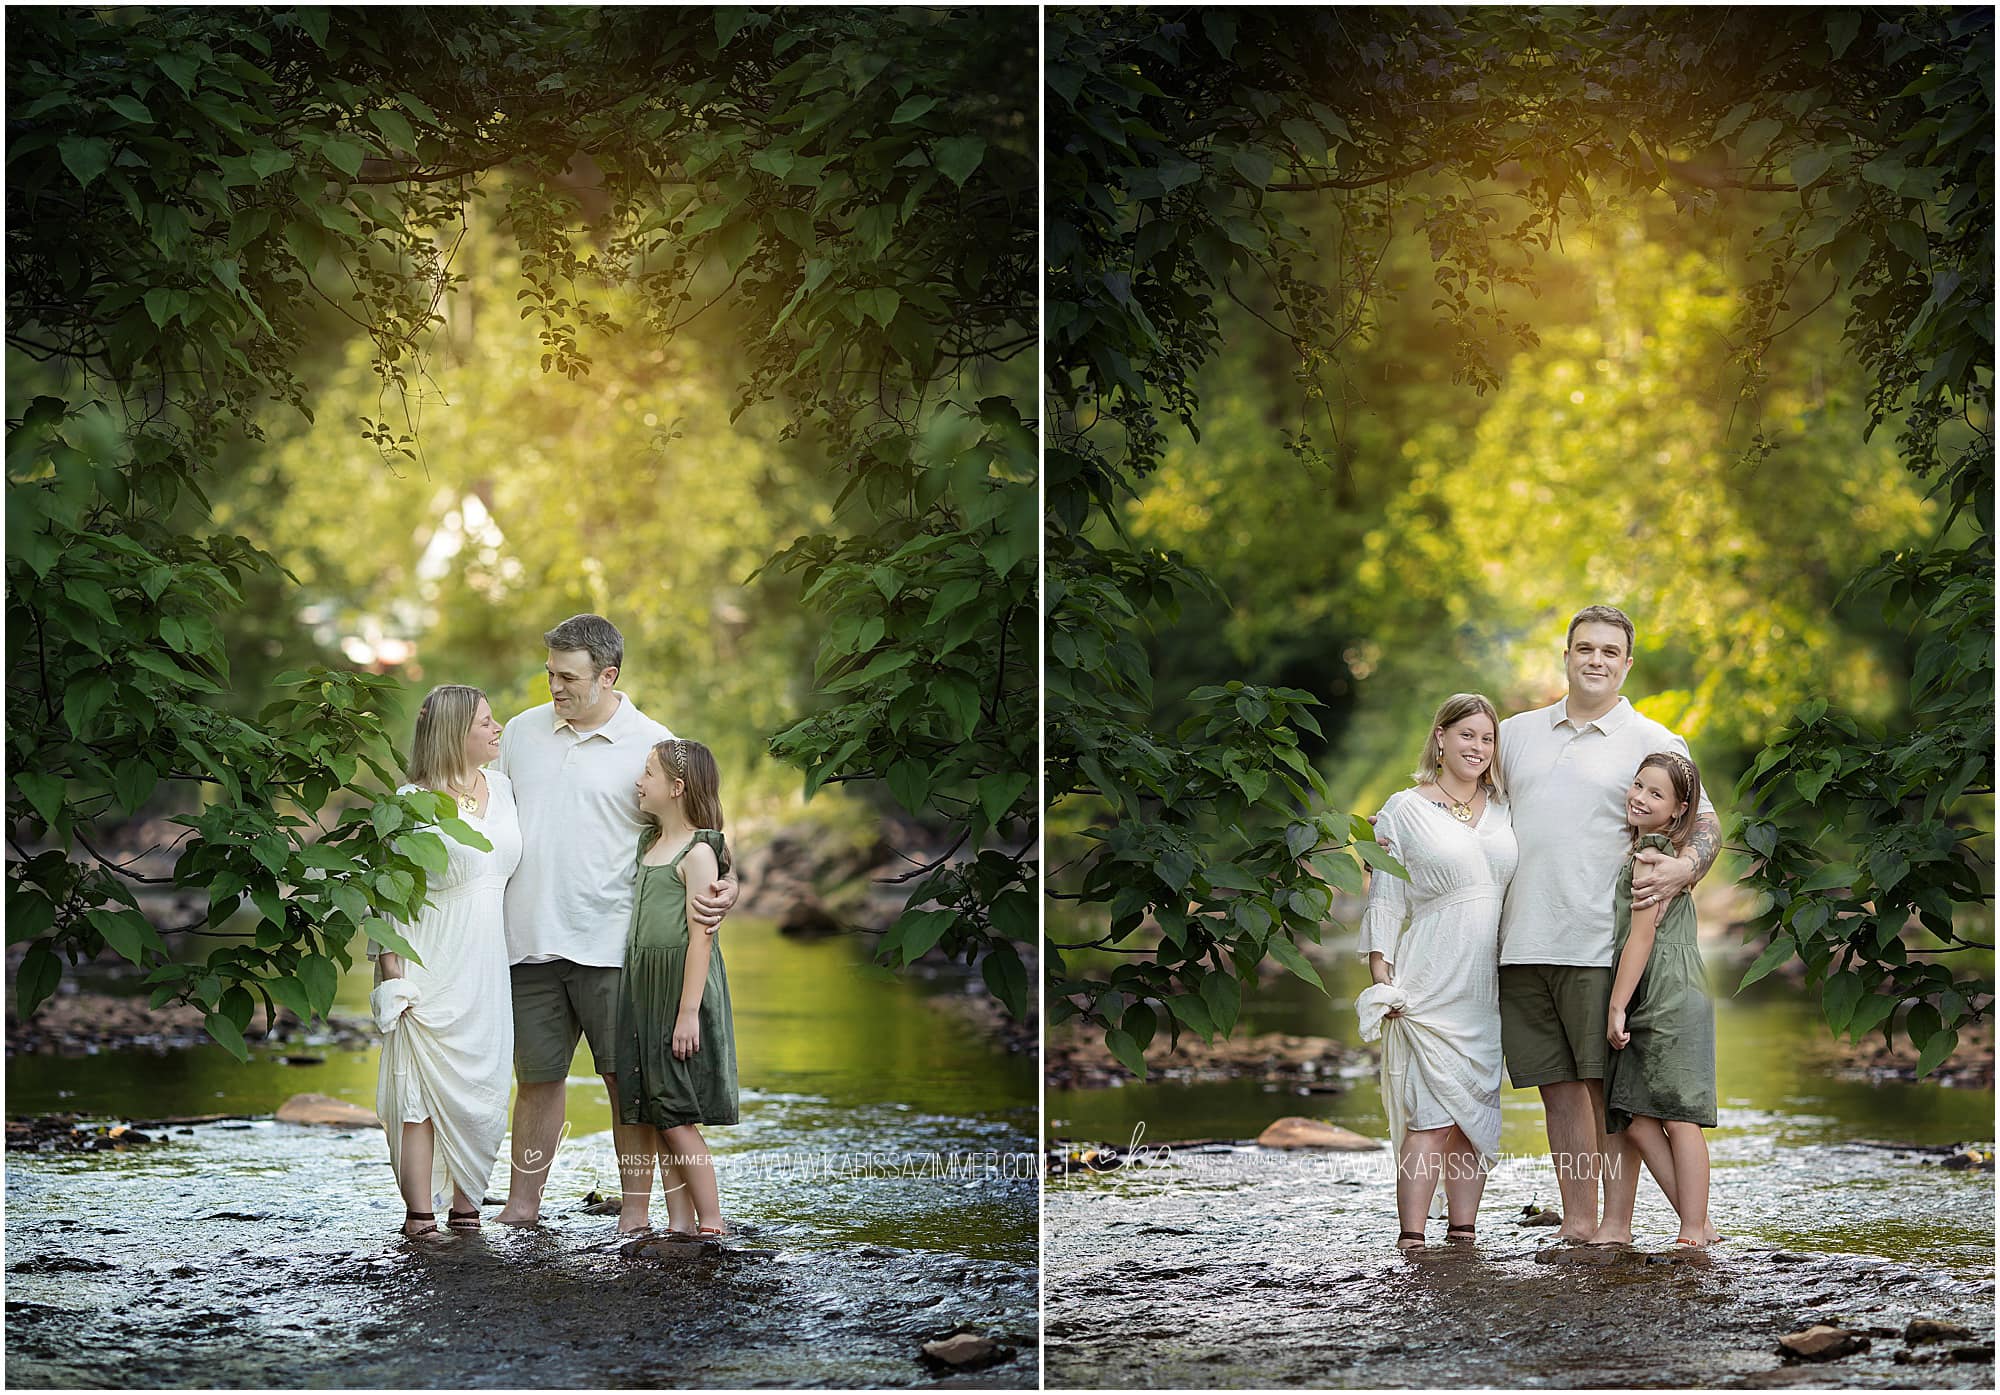 Mechanicsburg PA family poses together in the creek at their portrait session with Karissa Zimmer Photography